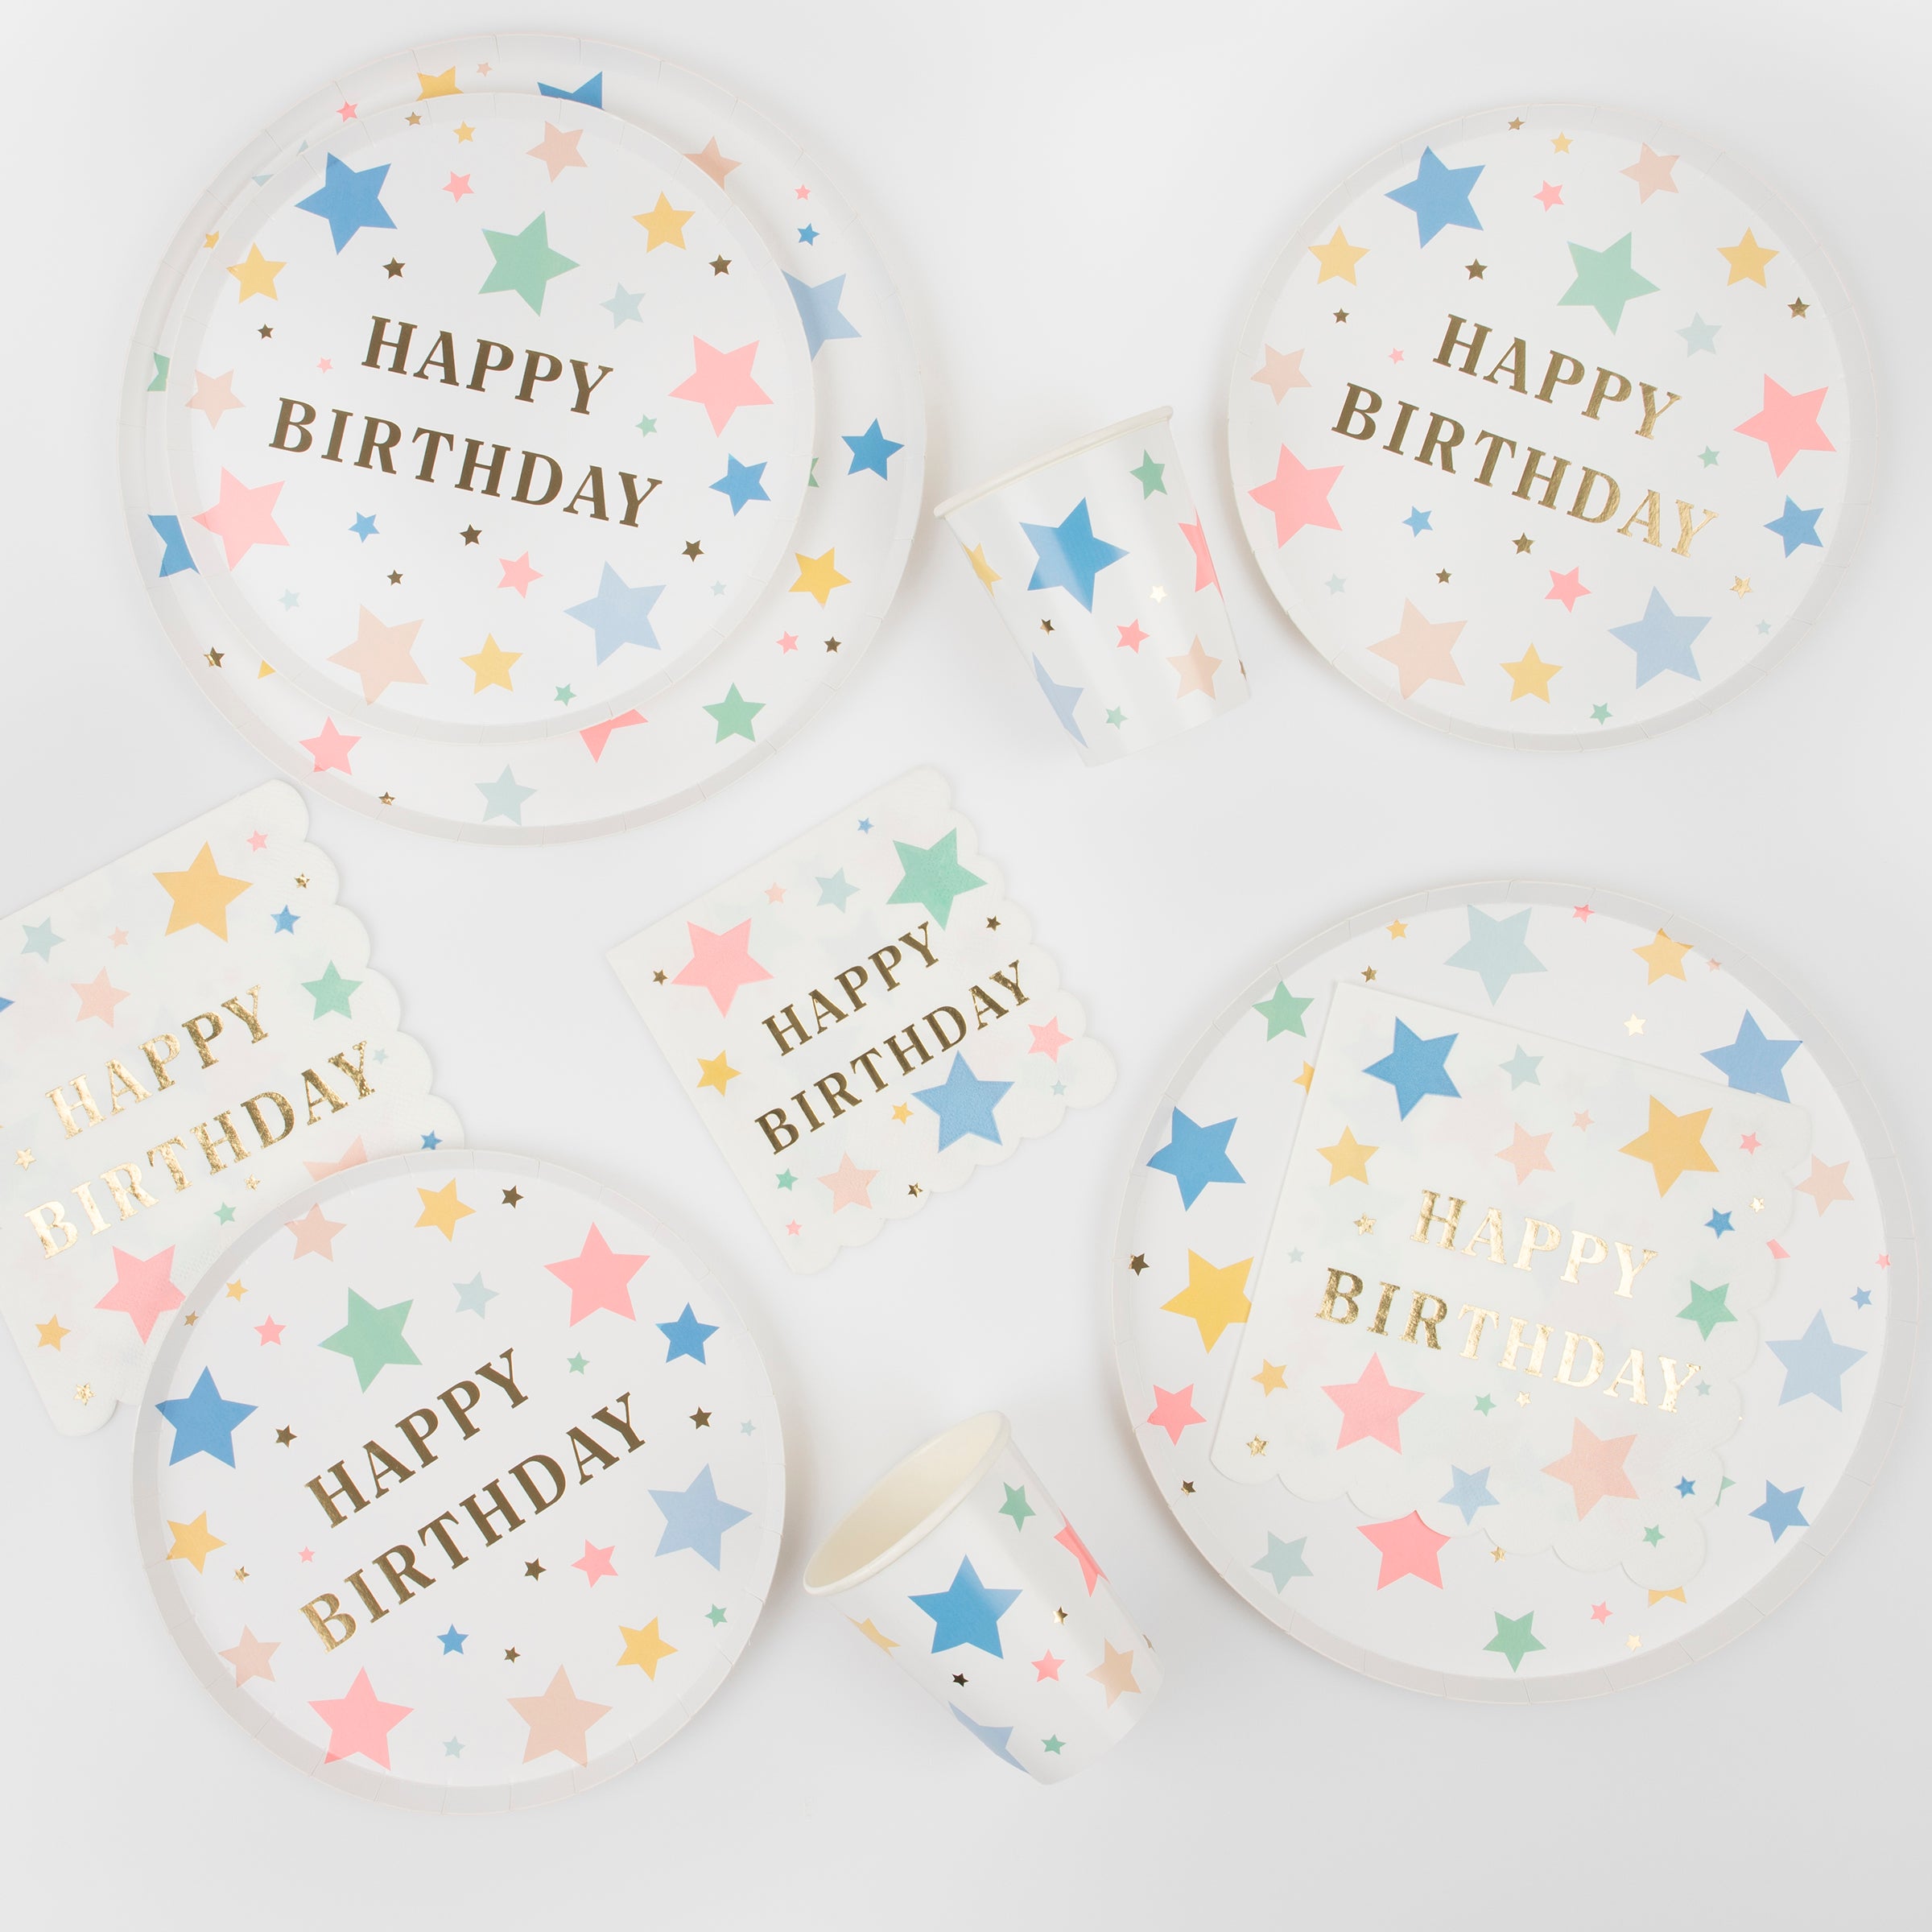 Our paper cups have colorful stars and shiny gold foil, ideal to add to your birthday party supplies.